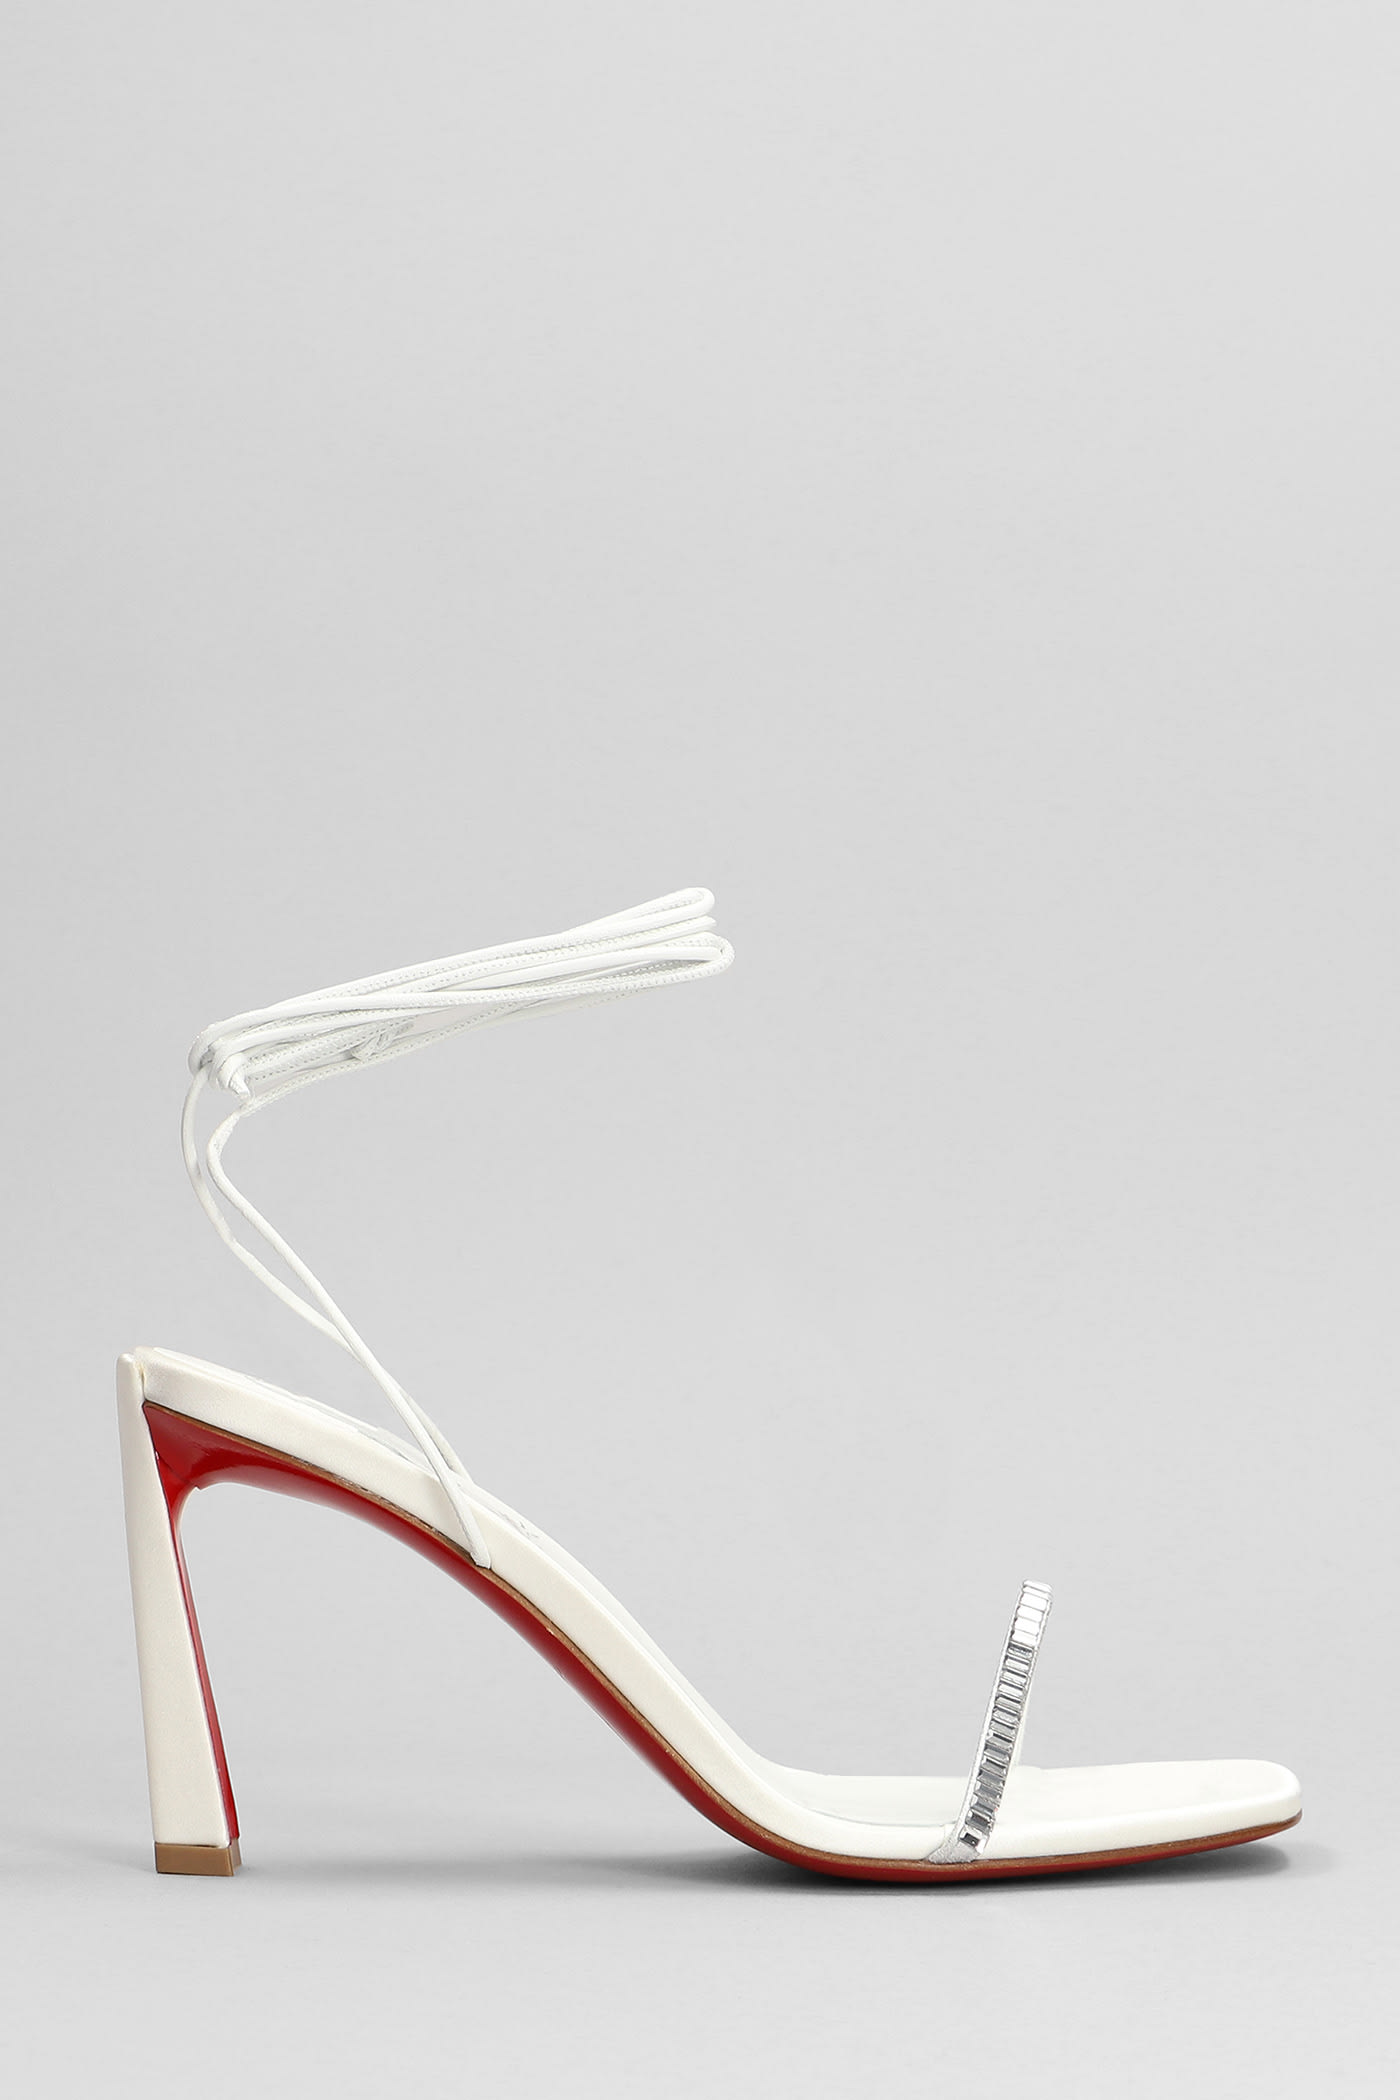 CHRISTIAN LOUBOUTIN CONDORA LACES STRASS SANDALS IN SILVER LEATHER